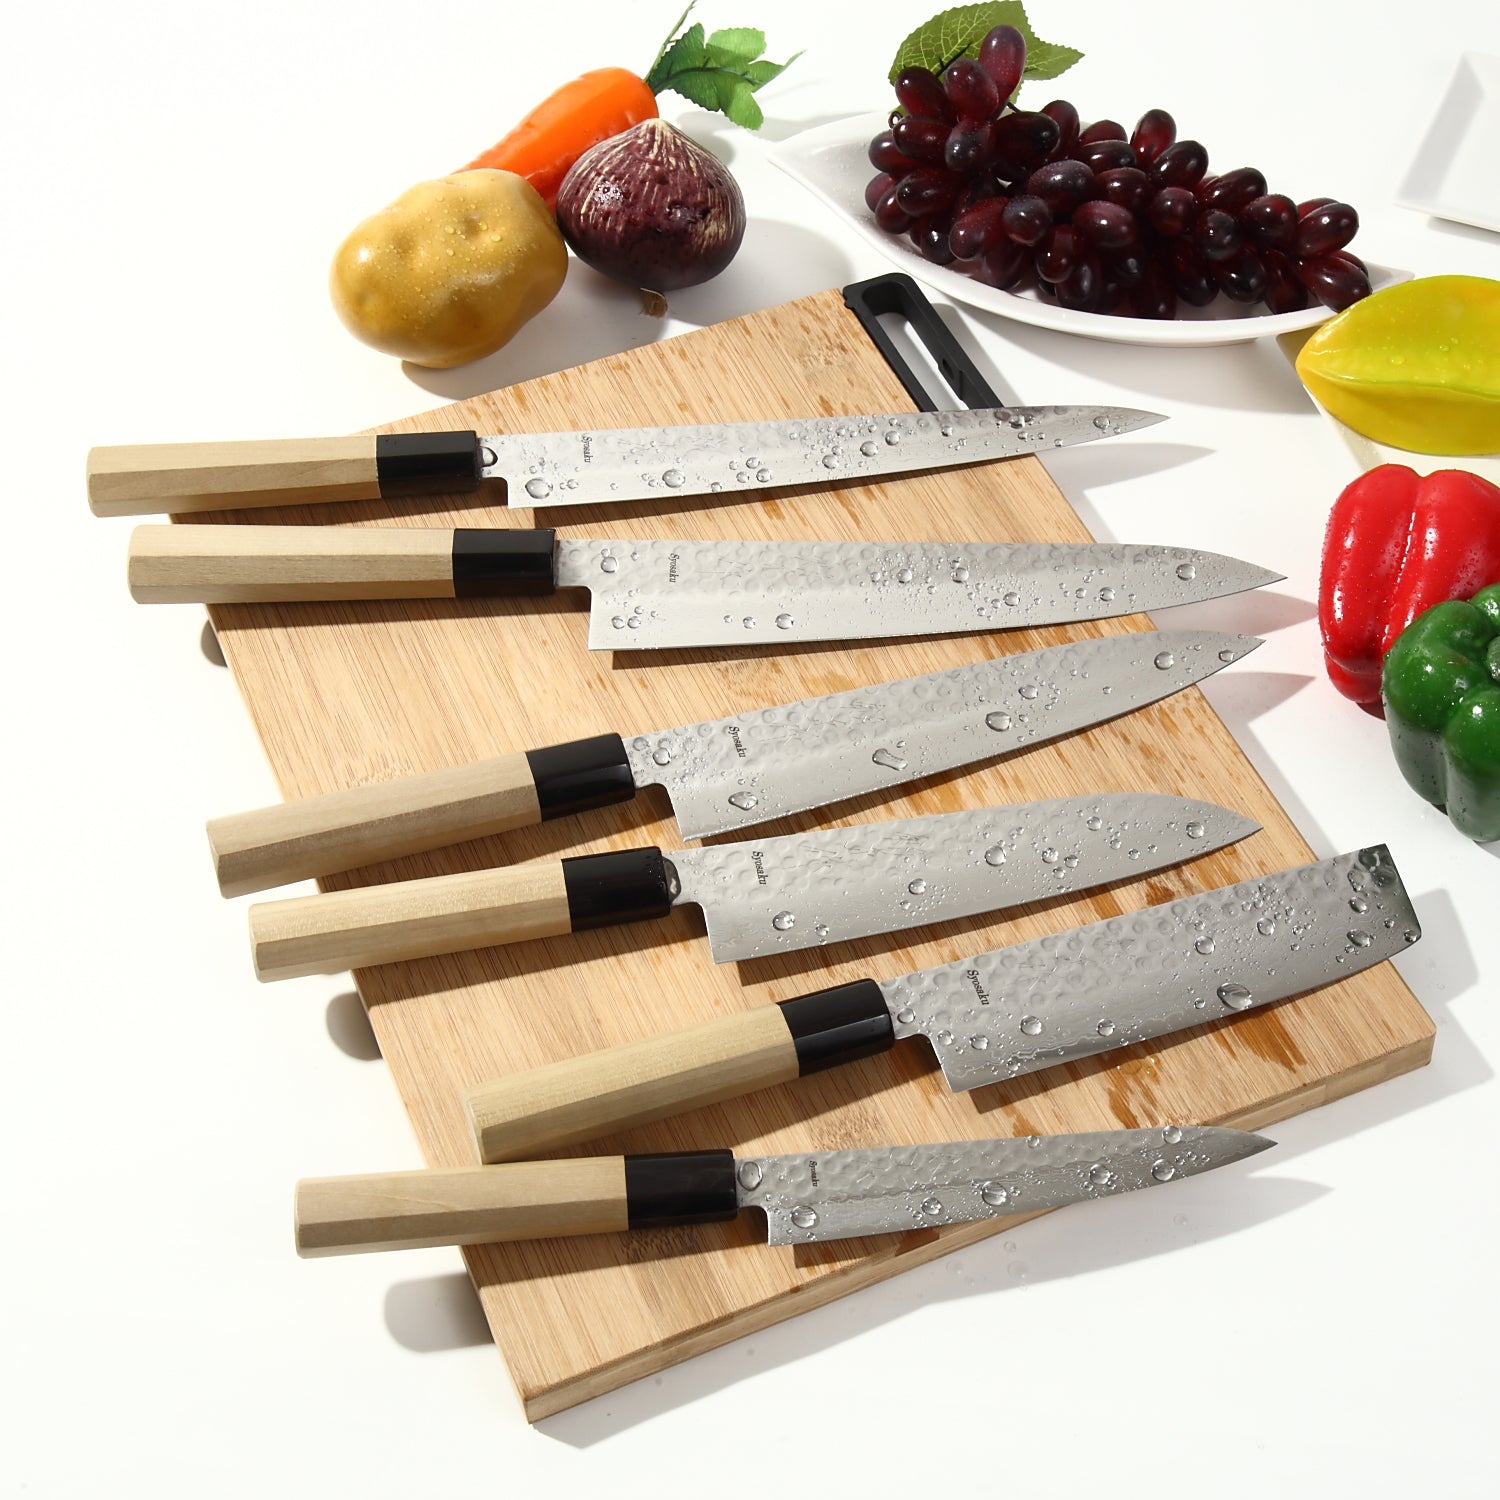 Hageshi AUS10 Japanese Chef Knife Set, 5-Piece By Seido Knives